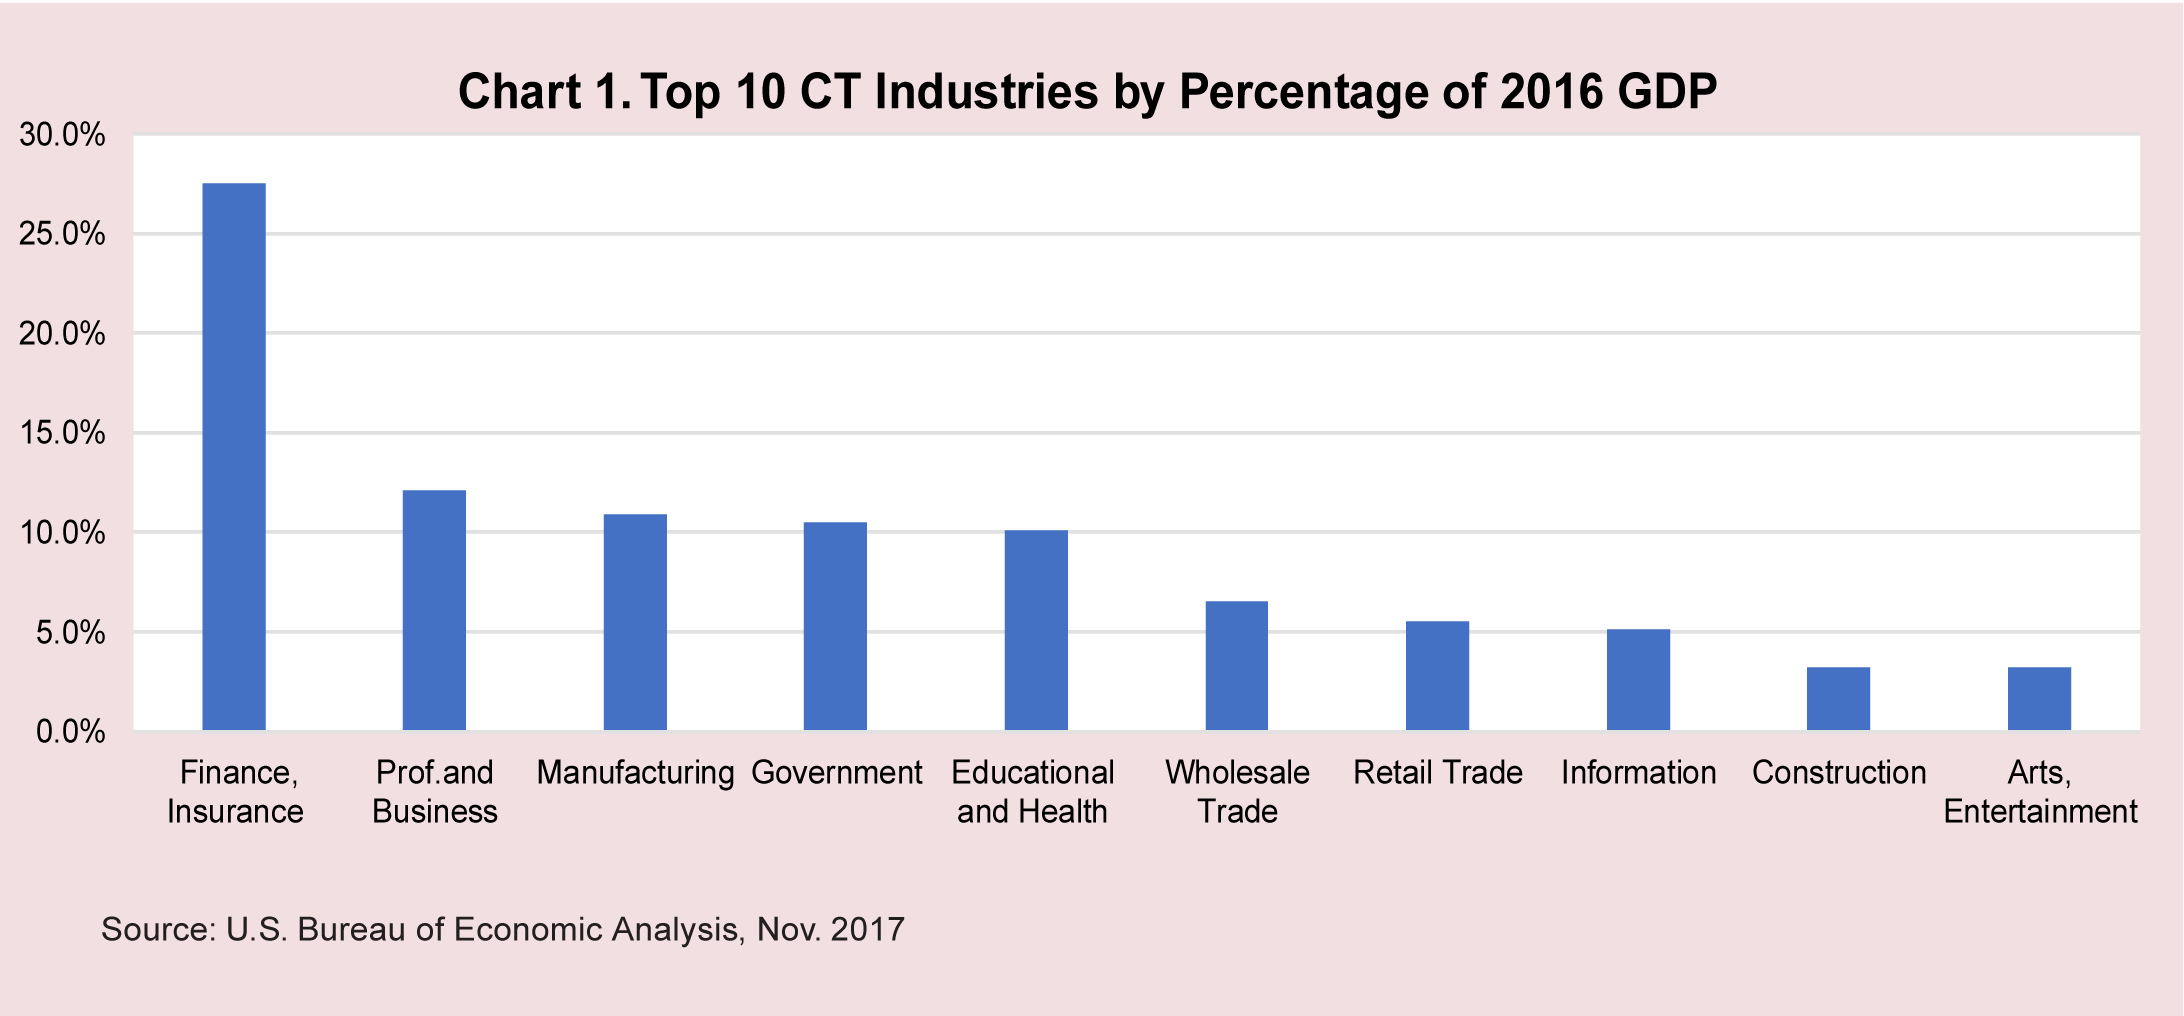 Chart 1. Top 10 CT Industries by Percentage of 2016 GDP